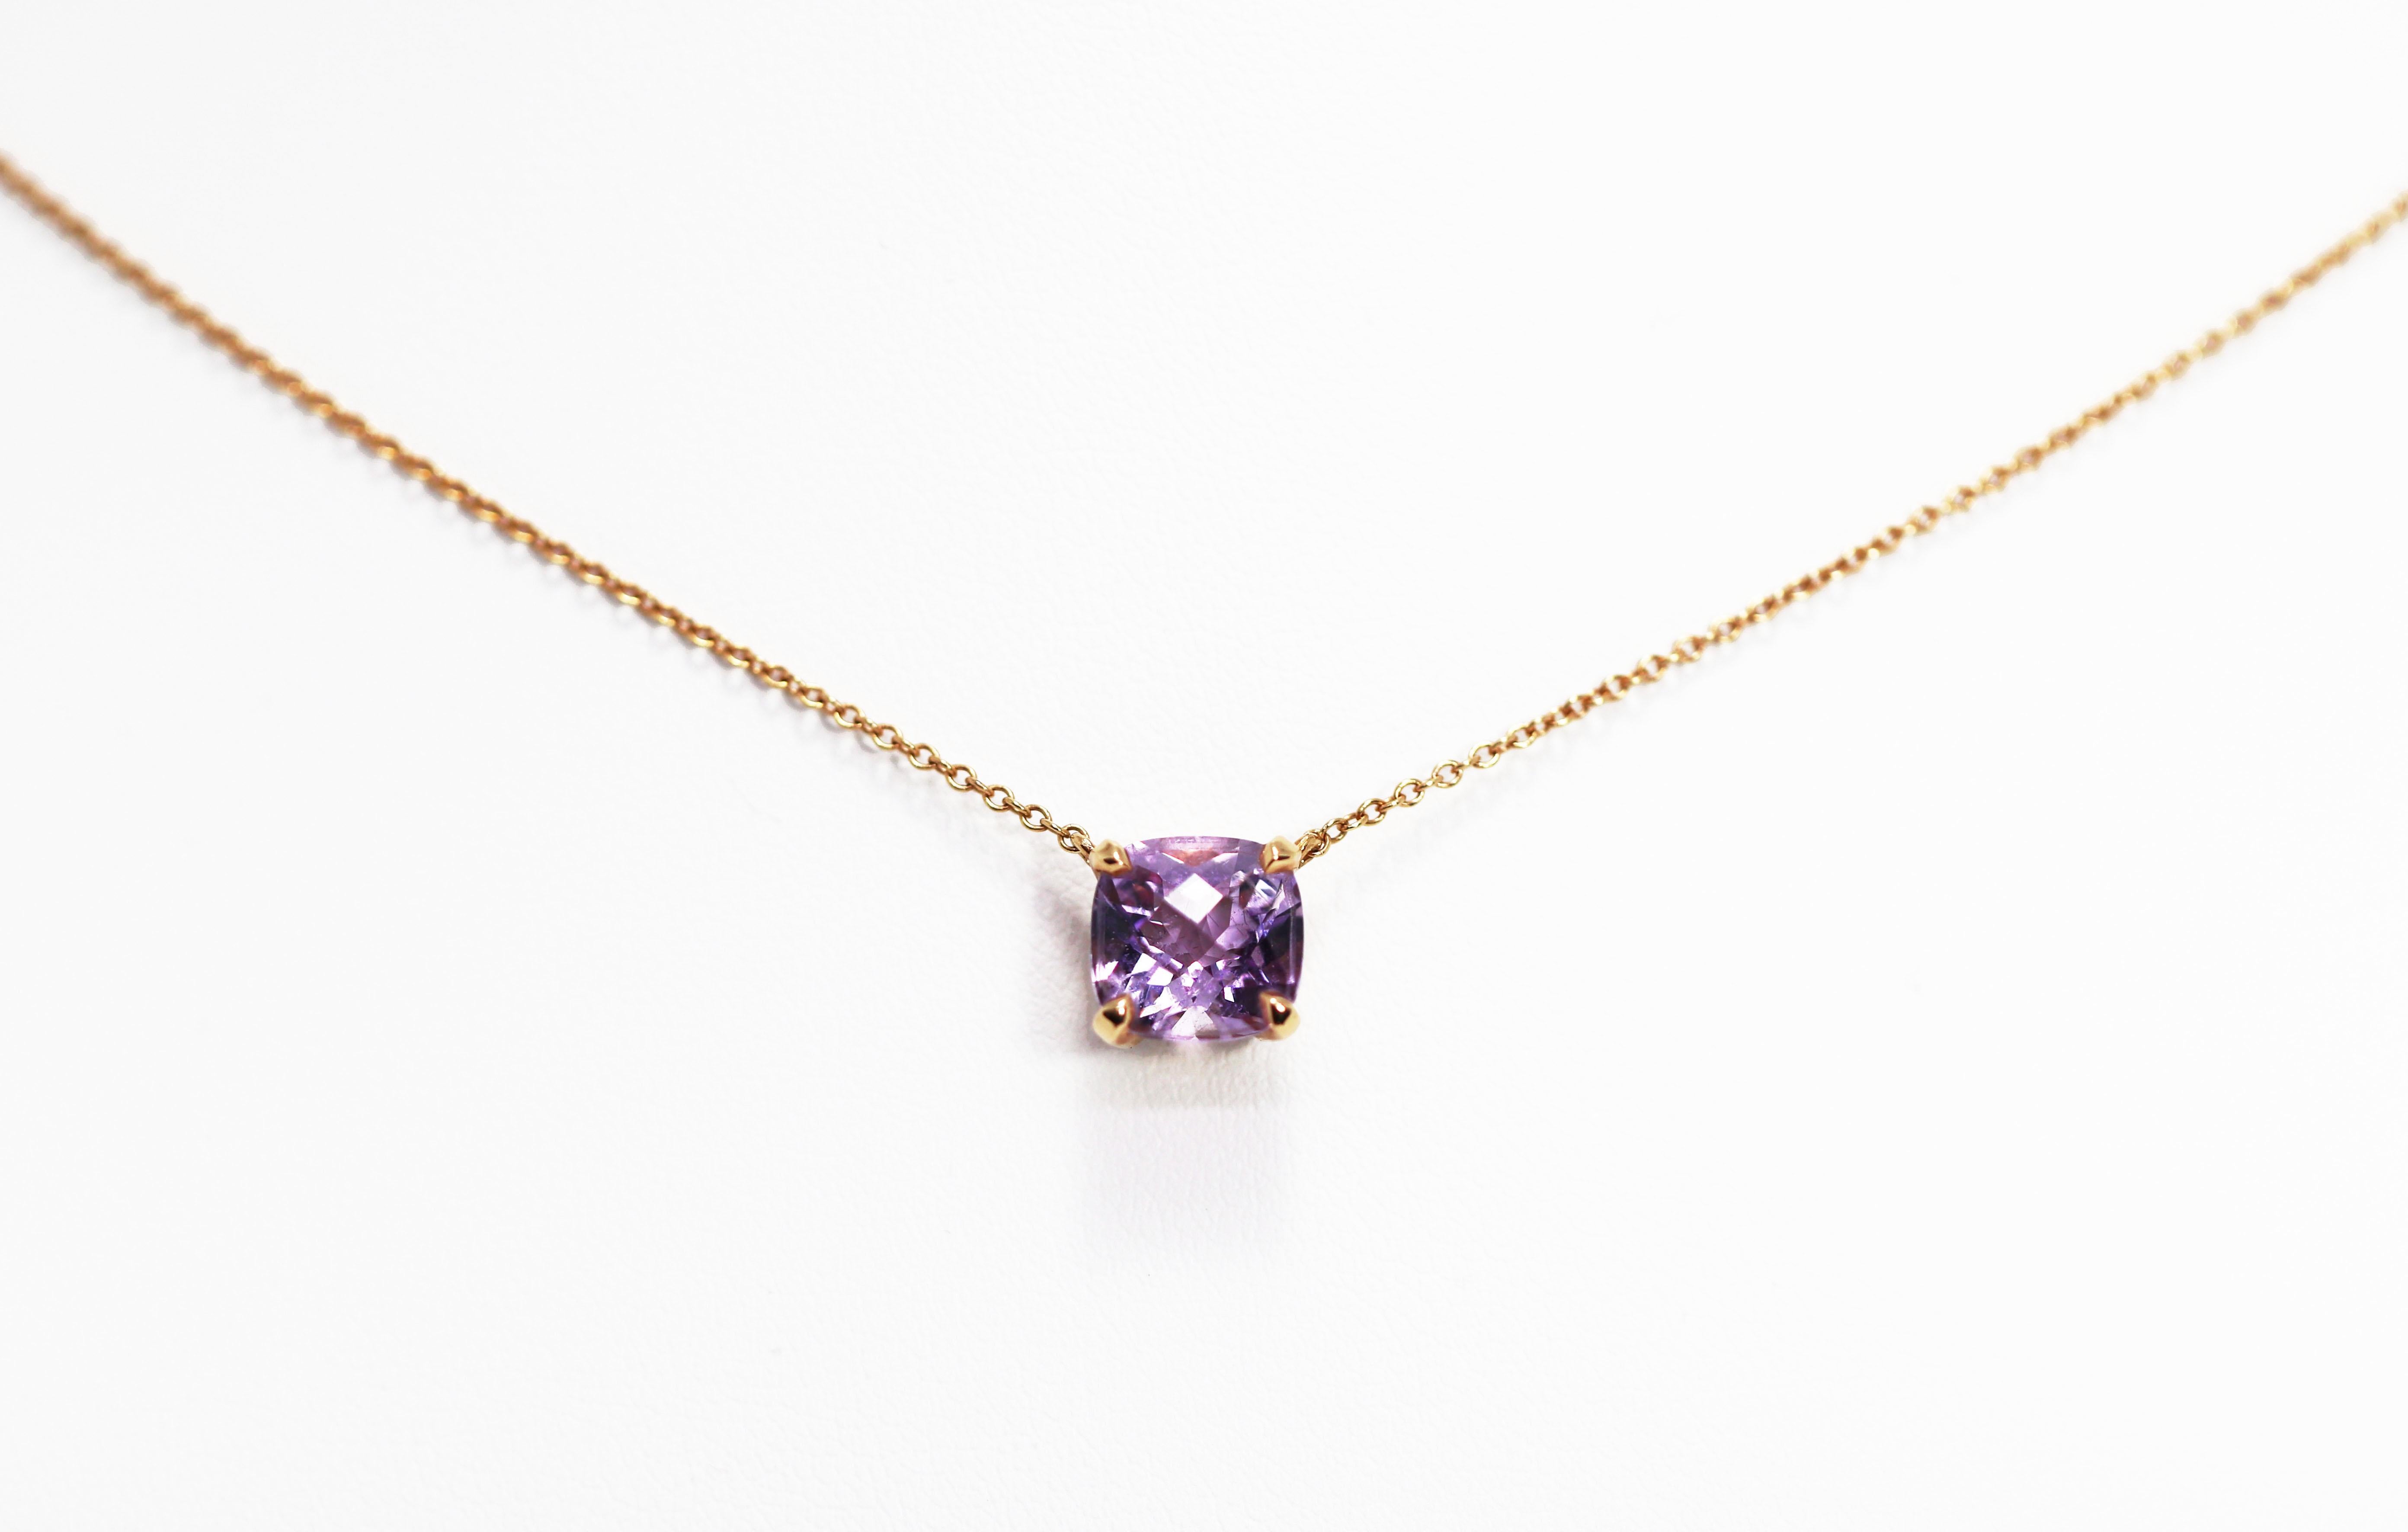 Tiffany & Co necklace and earring set. The necklace is a delicate four claw rose gold mount set with a 8x8mm cushion shaped amethyst attached to a 16